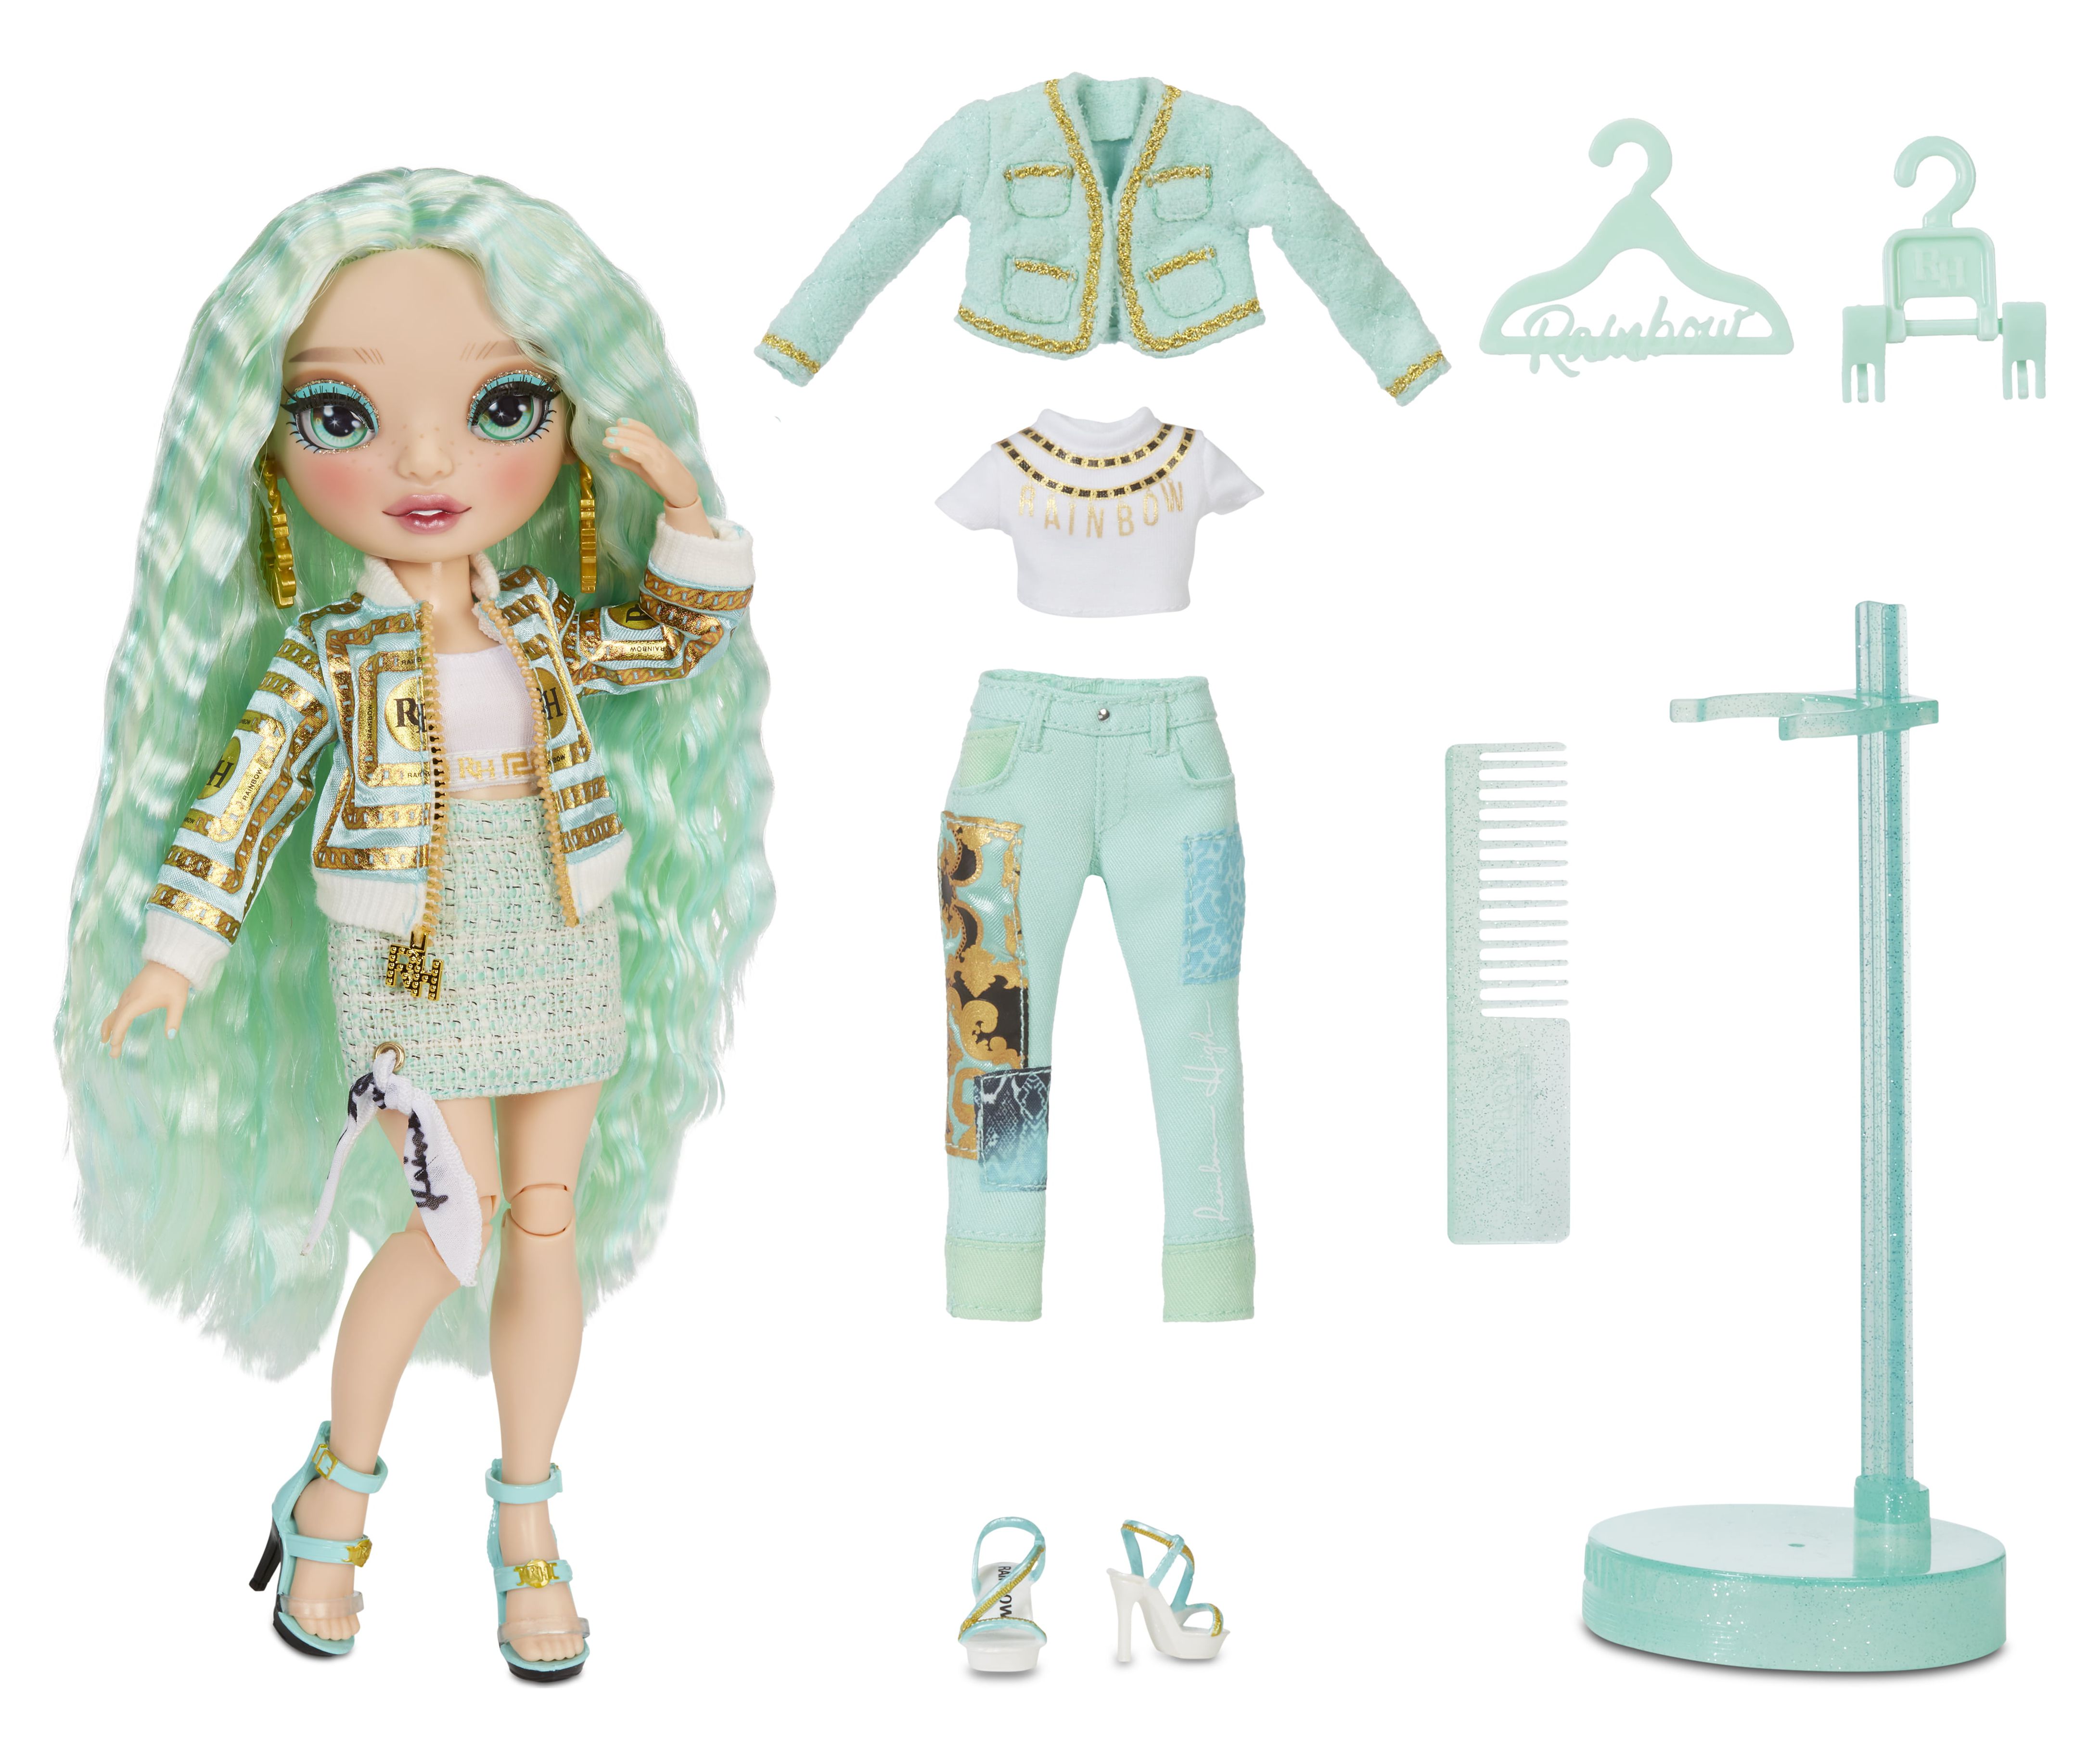 Rainbow High Daphne Minton – Mint (Light Green) Fashion Doll With 2 Outfits To Mix & Match And Doll Accessories, Great Gift And Toy for Kids 6-12 Years Old - image 3 of 8